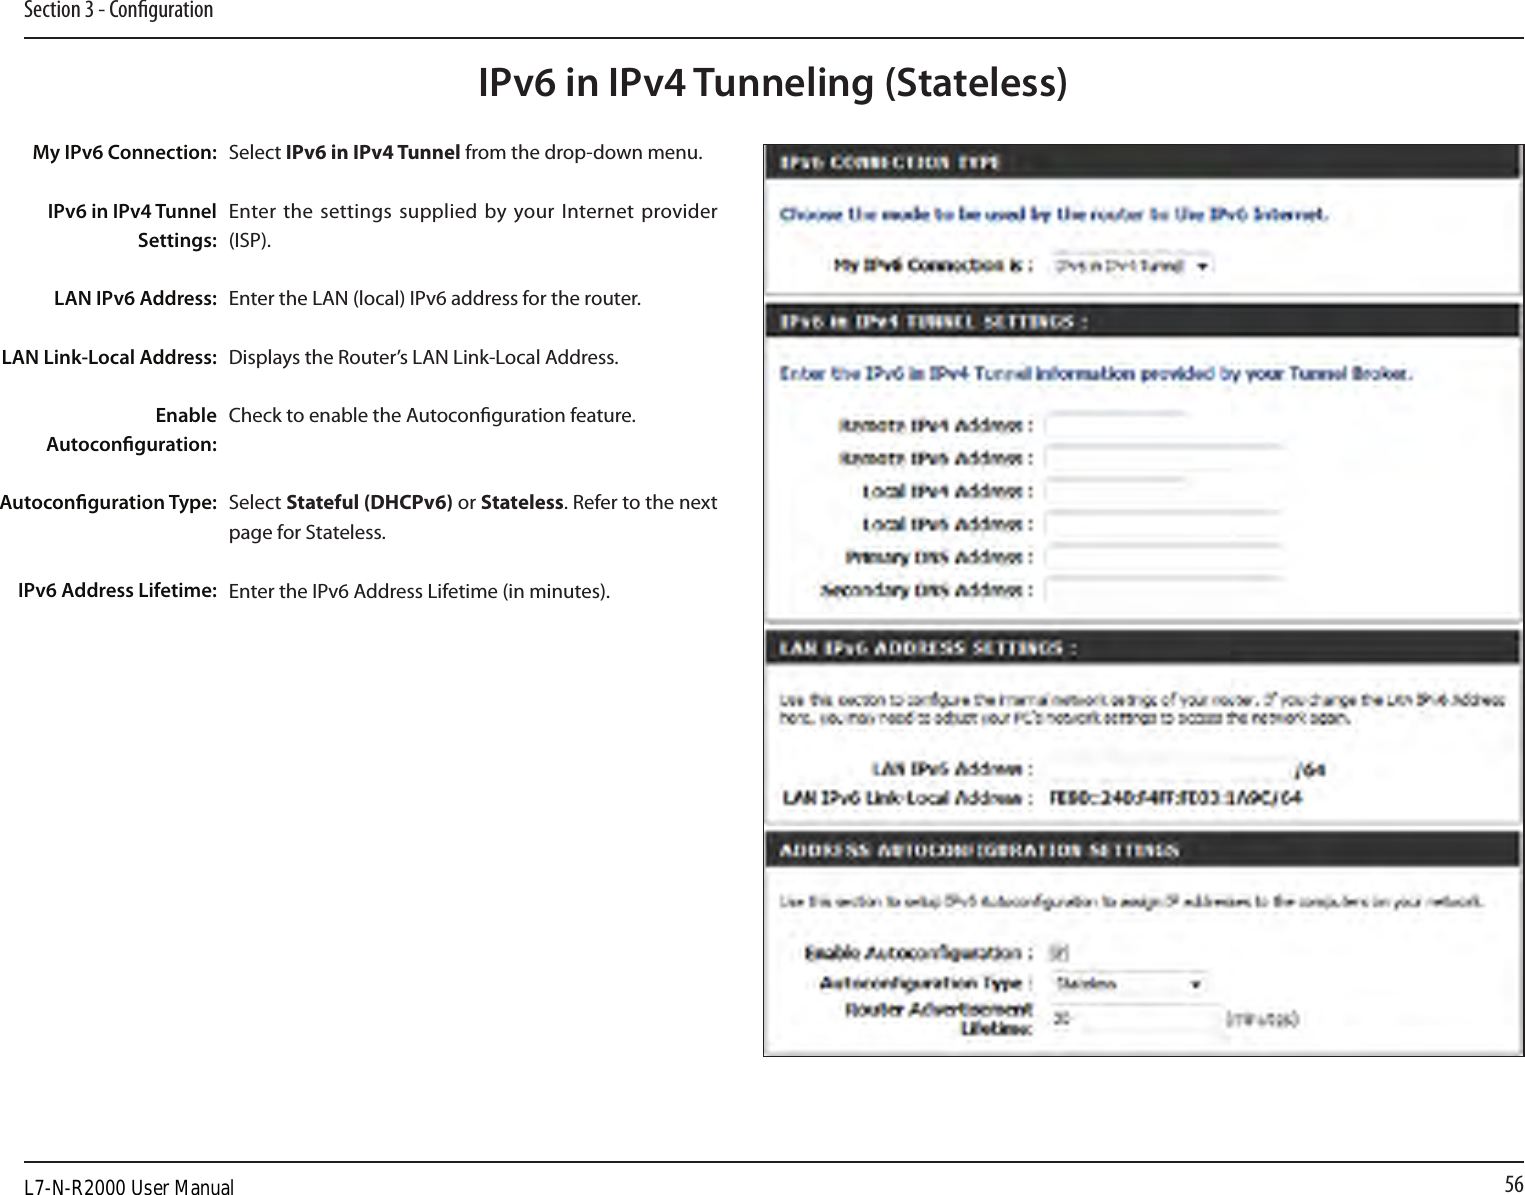 56Section 3 - CongurationIPv6 in IPv4 Tunneling (Stateless)Select IPv6 in IPv4 Tunnel from the drop-down menu.Enter the settings supplied  by your Internet  provider (ISP). Enter the LAN (local) IPv6 address for the router. Displays the Router’s LAN Link-Local Address.Check to enable the Autoconguration feature.Select Stateful (DHCPv6) or Stateless. Refer to the next page for Stateless.Enter the IPv6 Address Lifetime (in minutes).My IPv6 Connection:IPv6 in IPv4 Tunnel Settings:LAN IPv6 Address:LAN Link-Local Address:Enable Autoconguration:Autoconguration Type:IPv6 Address Lifetime:L7-N-R2000 User Manual